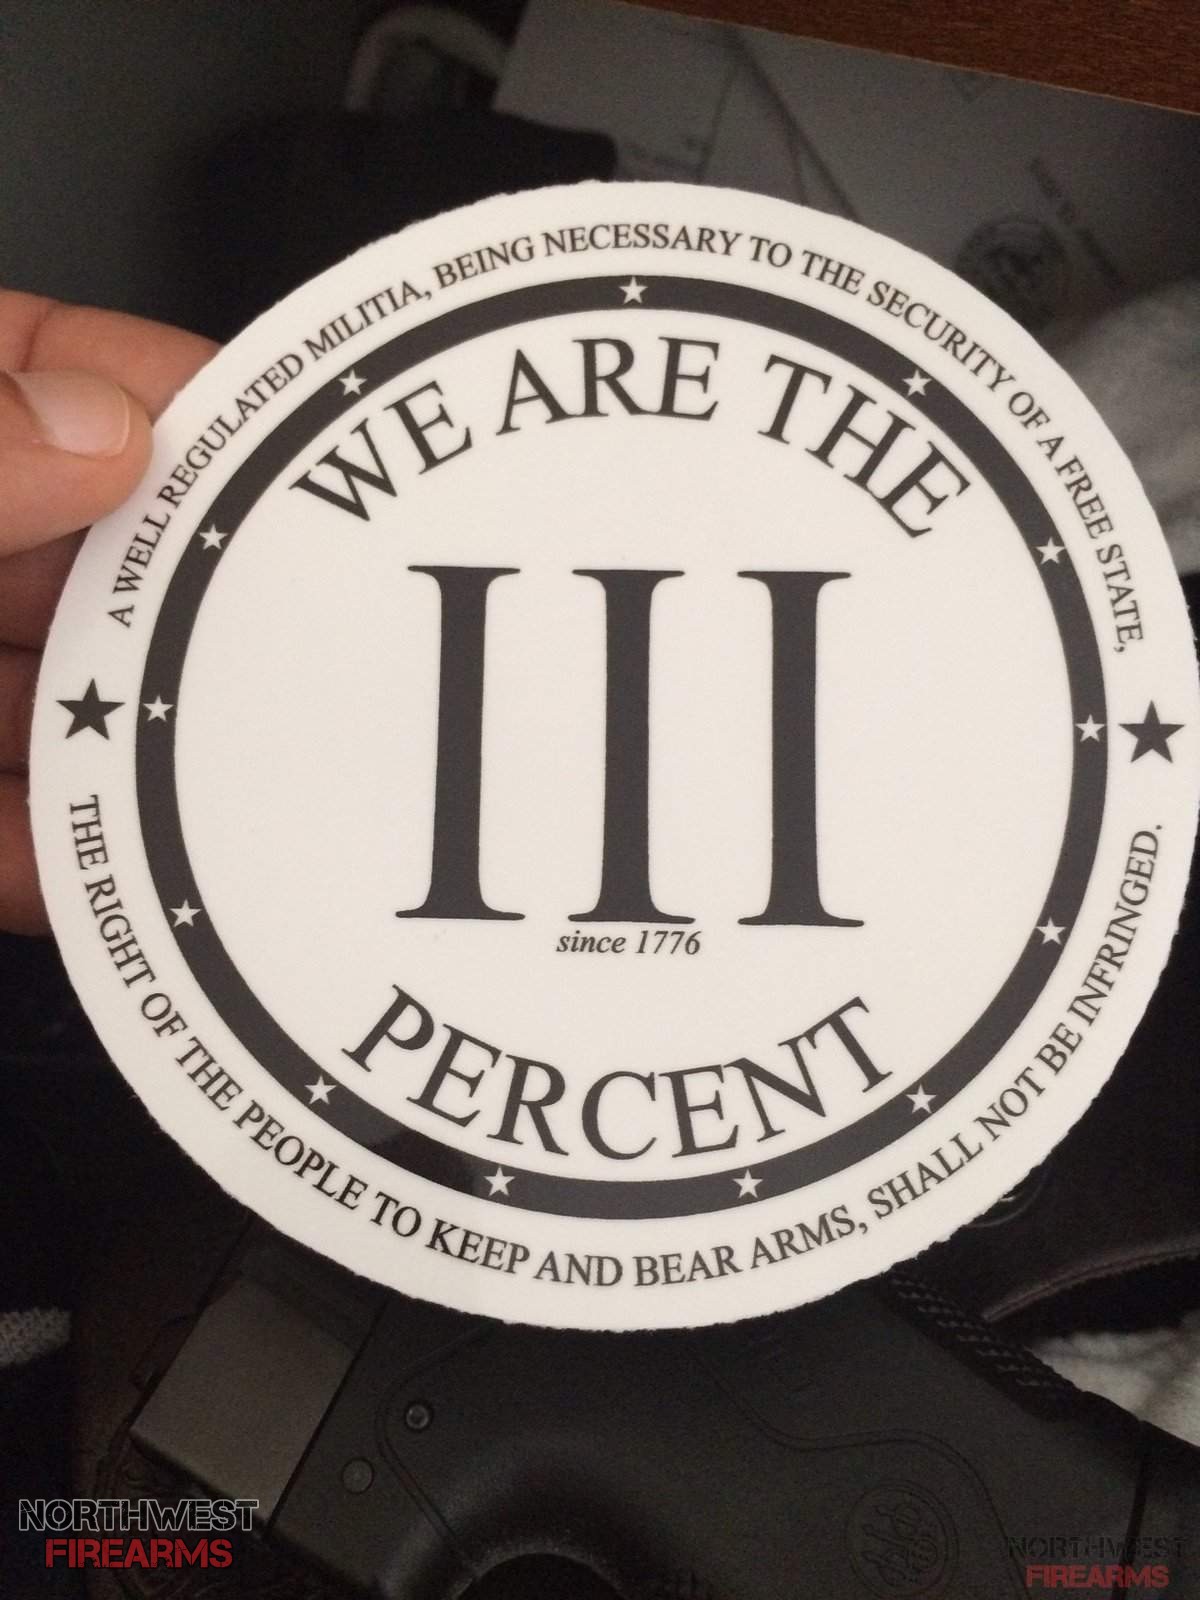 we are the III percent